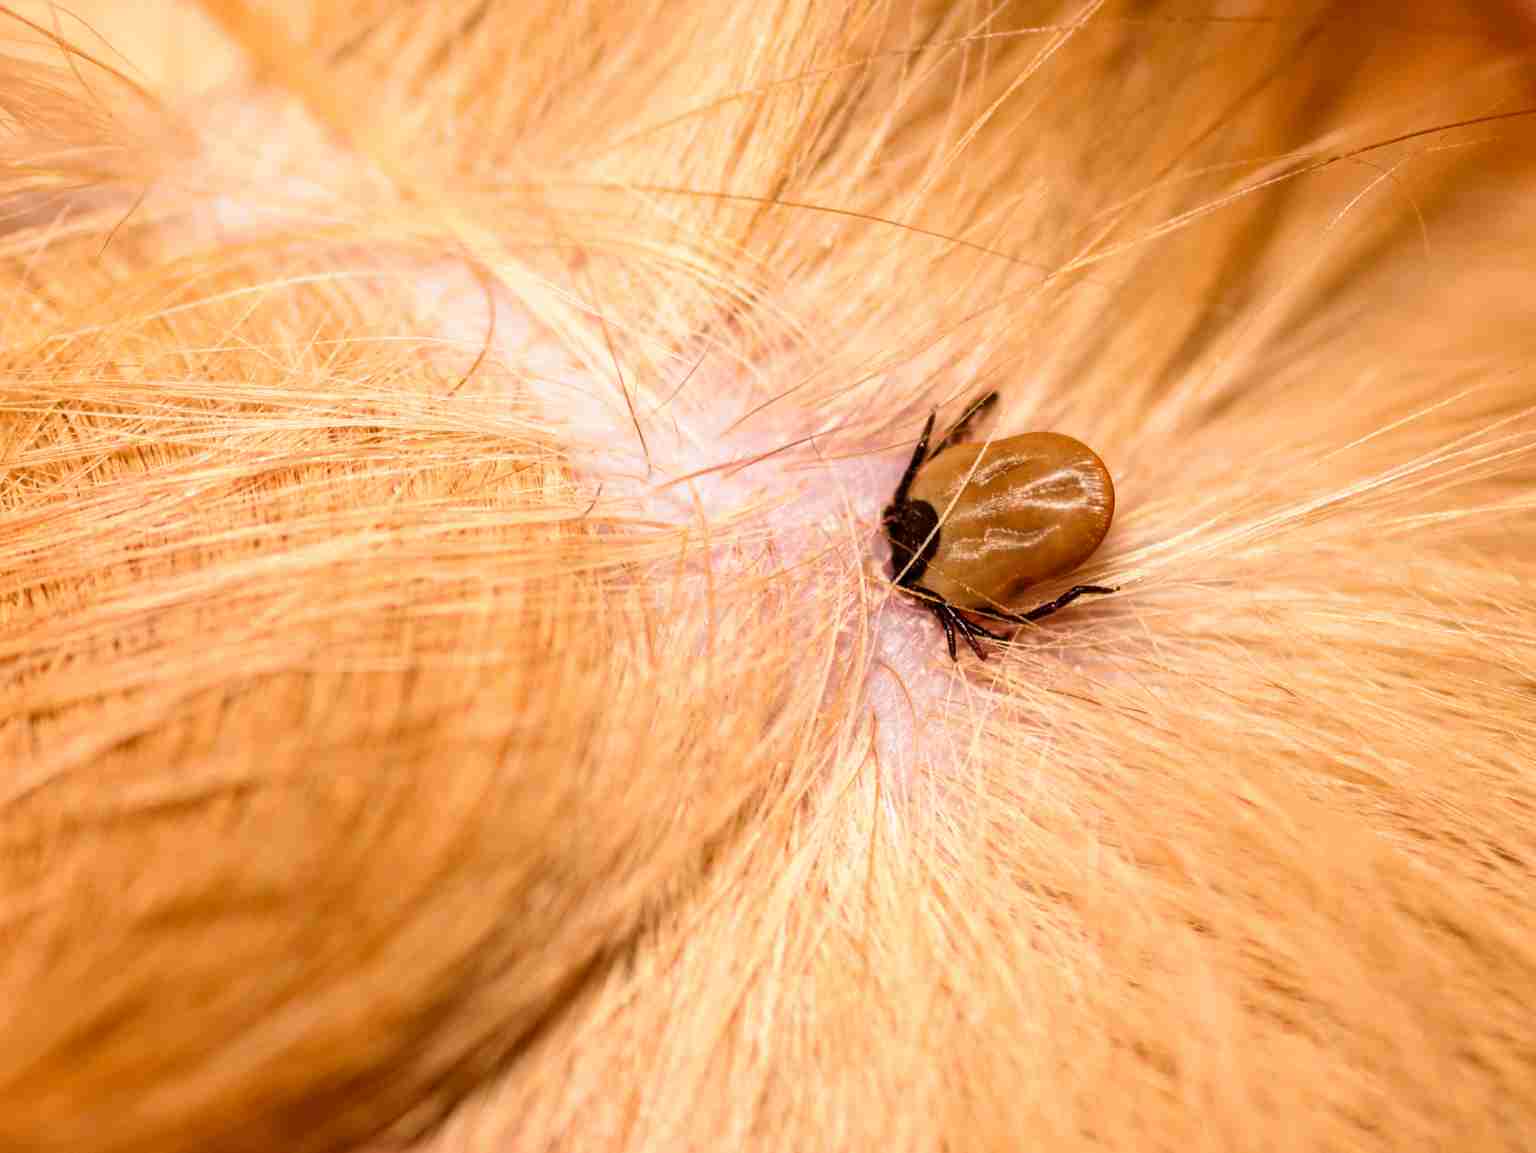 A close-up of a tick on a pet's skin